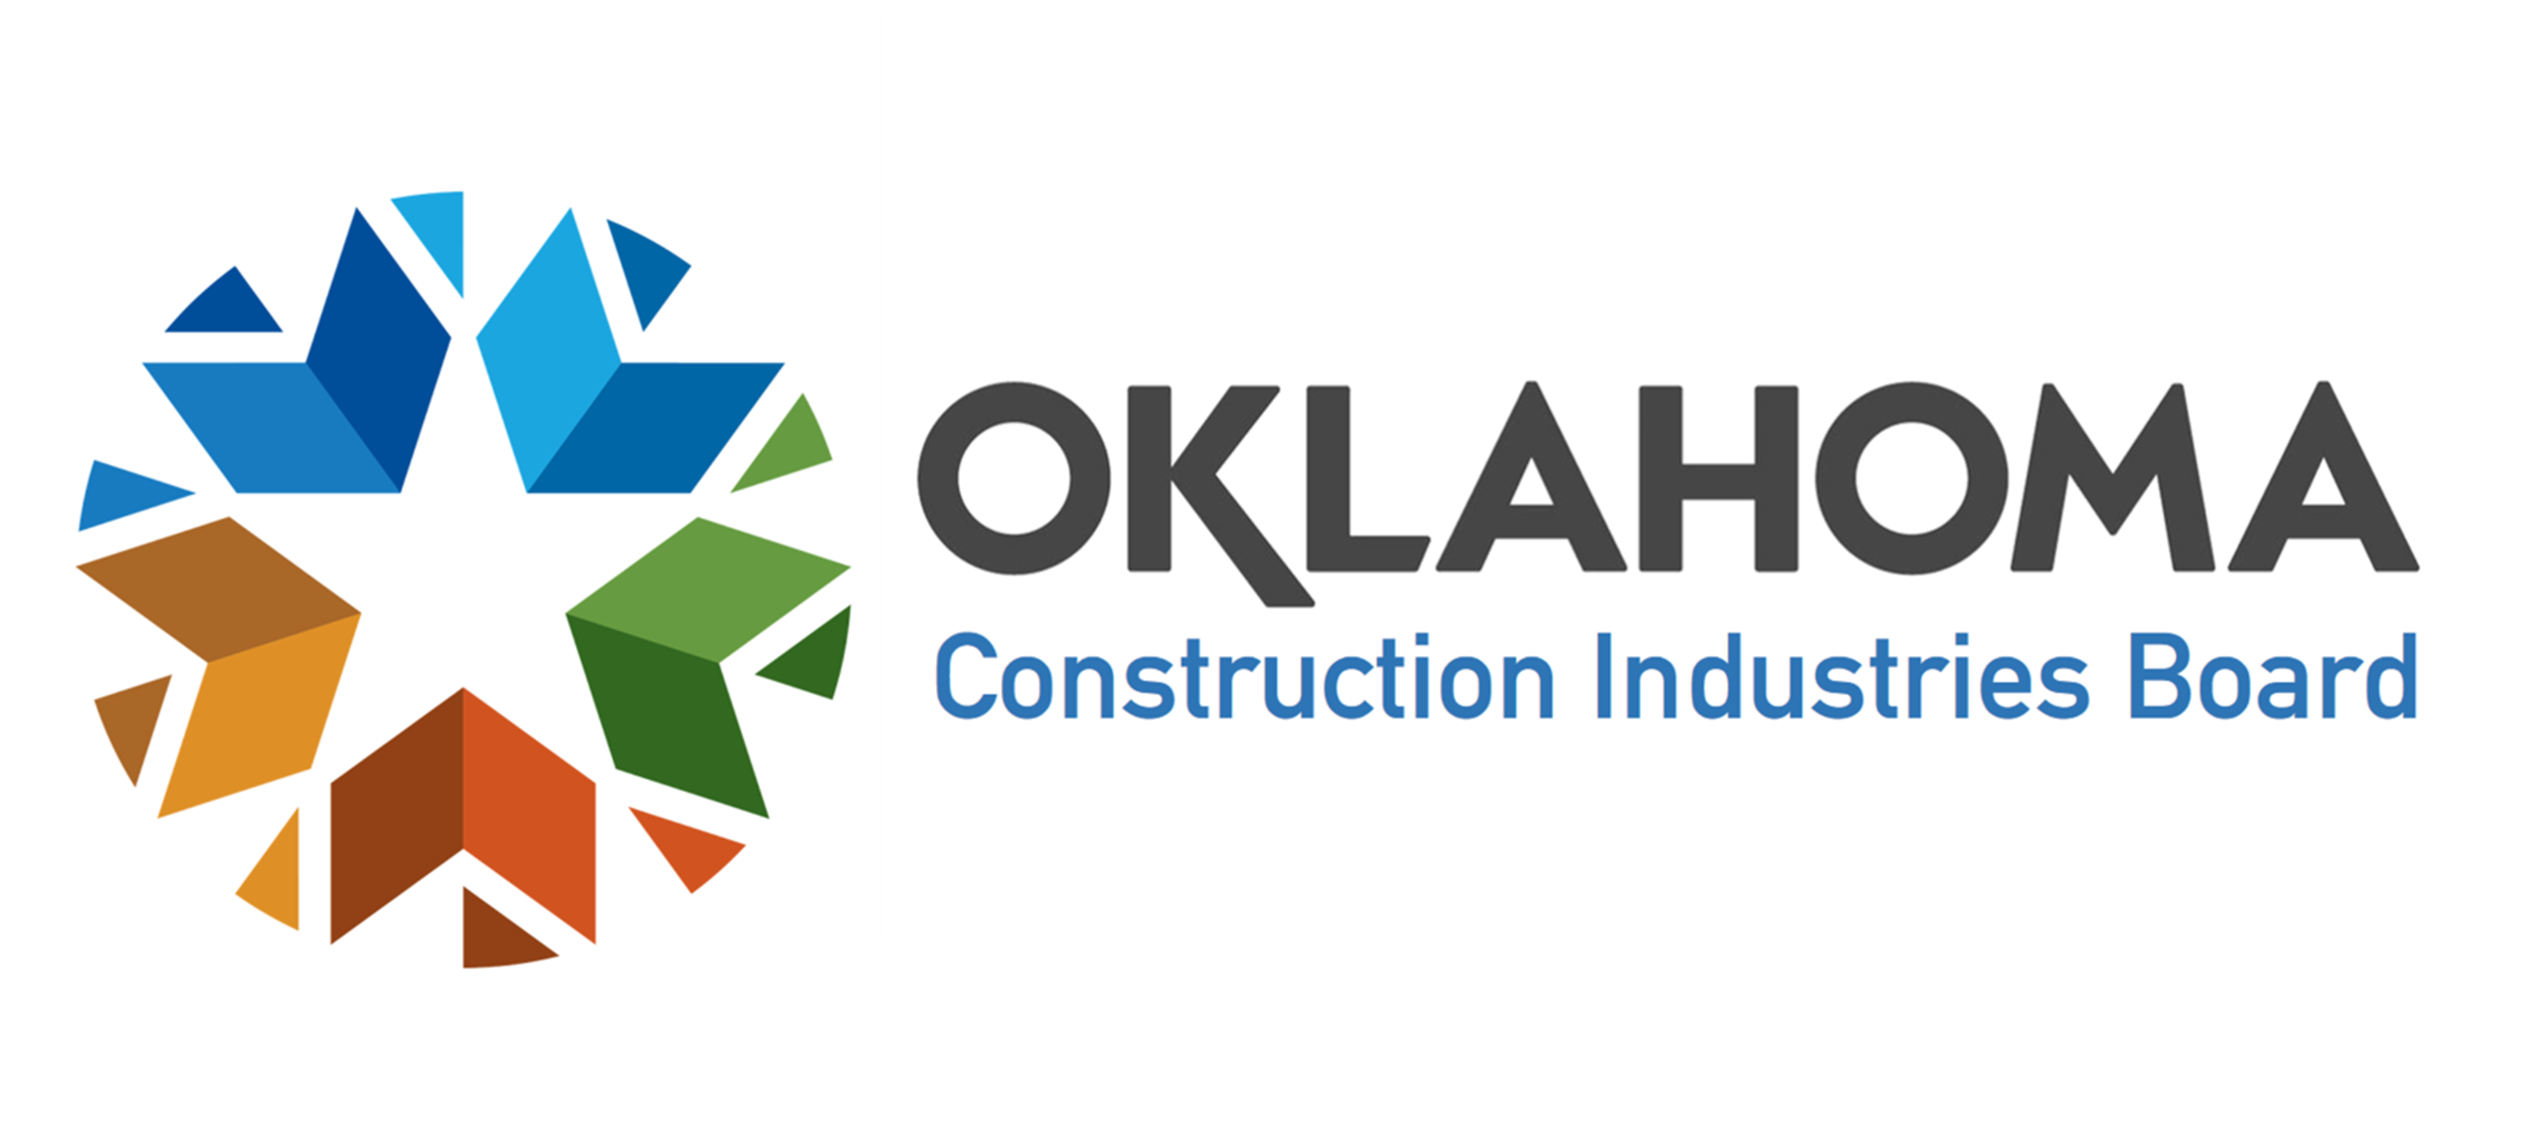 Construction Industries Board | State of Oklahoma logo